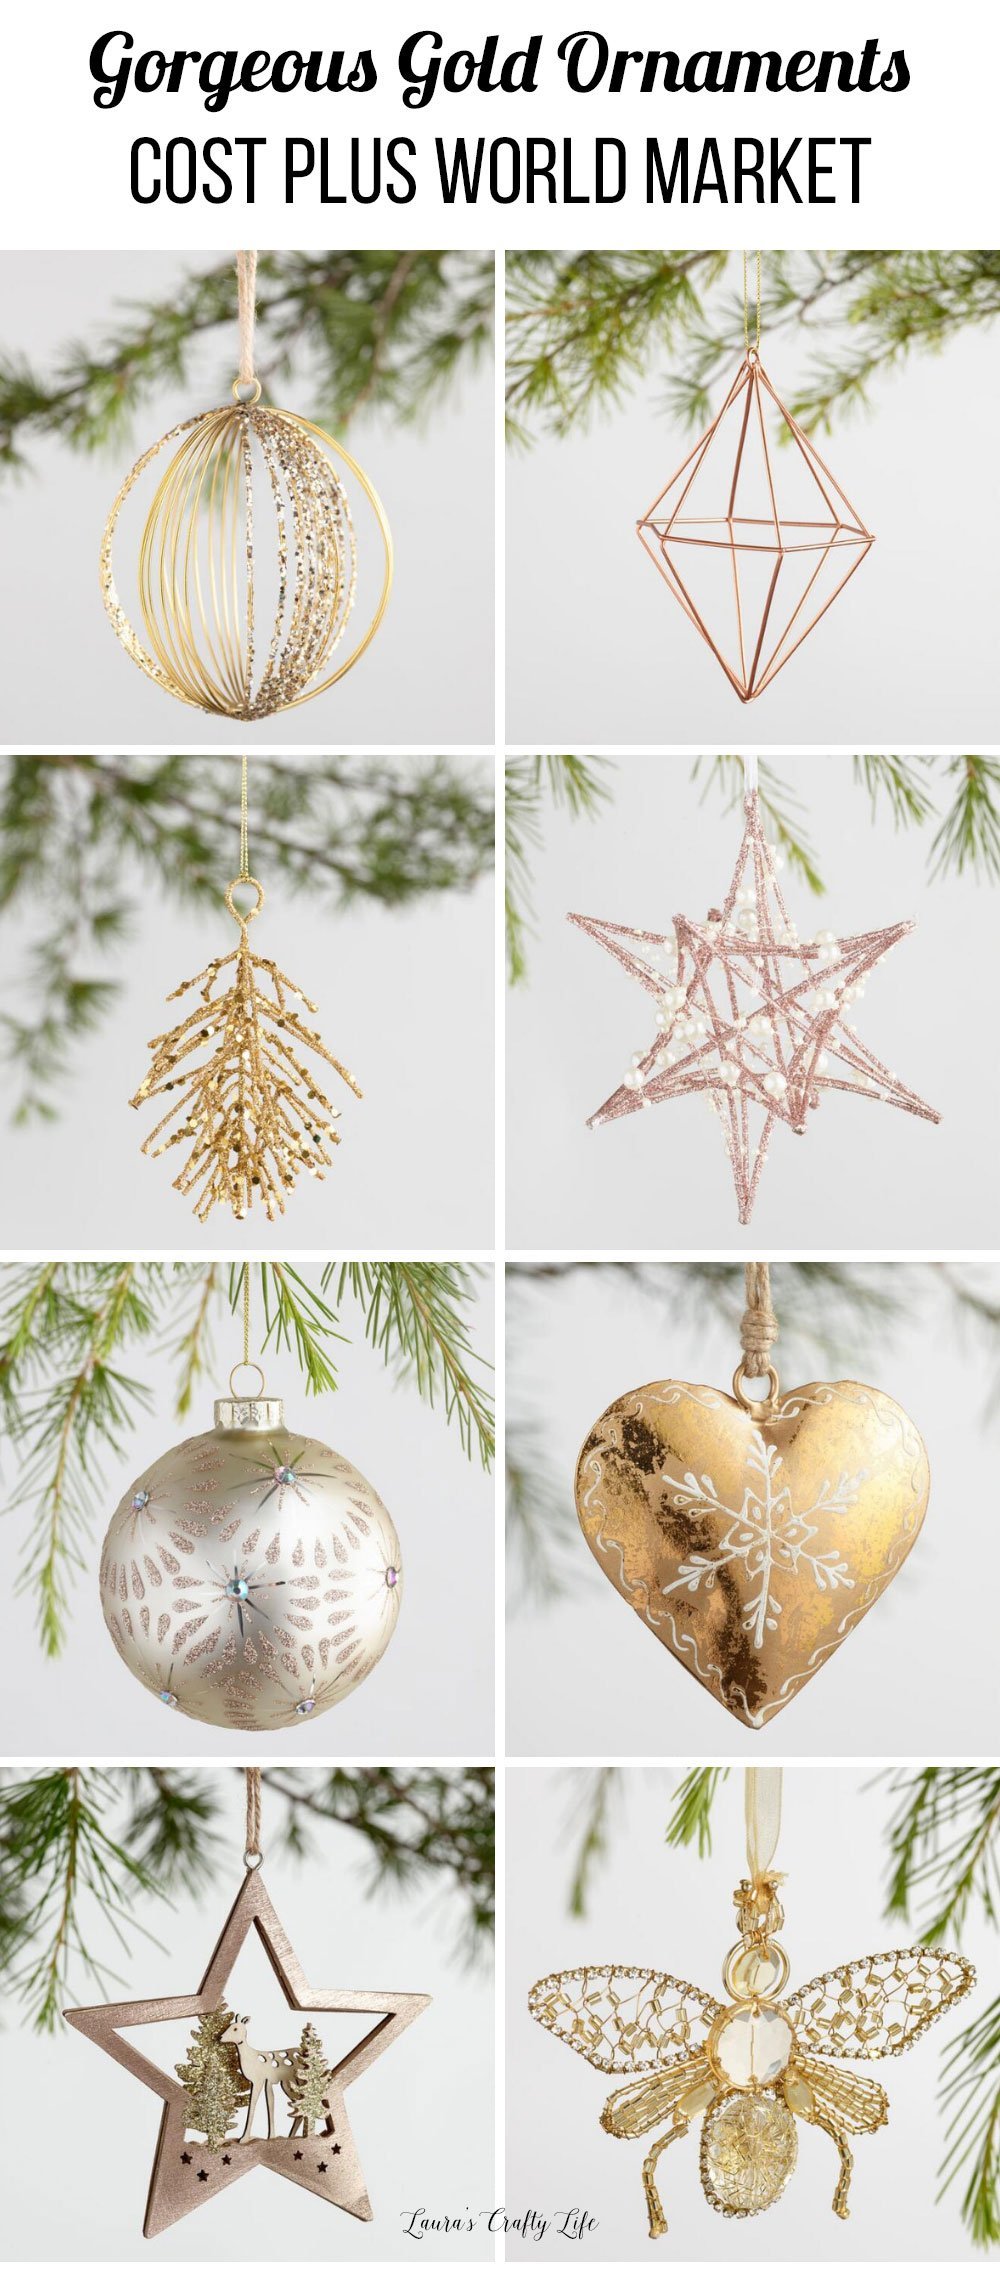 #sponsored by @worldmarket Gorgeous gold ornaments from Cost Plus World Market to deck out your Christmas tree. #laurascraftylife #goldornaments #Christmas